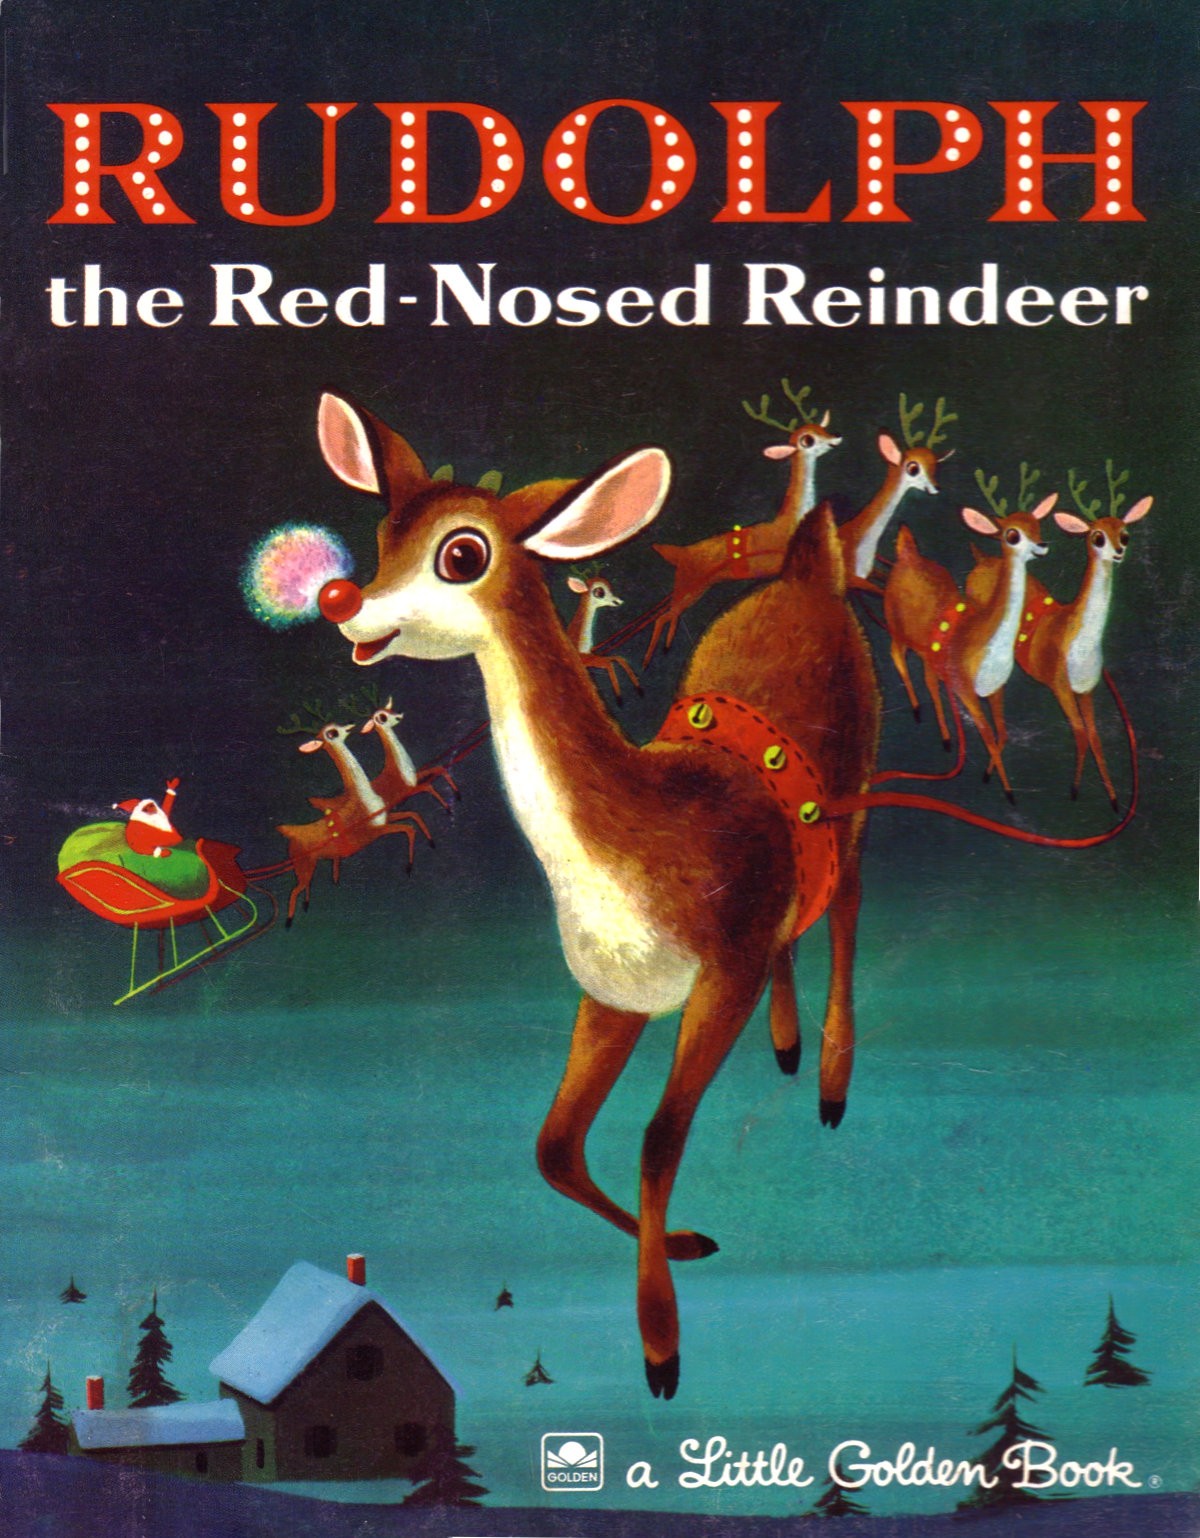 What does it mean to ‘Get Rudolphed’?